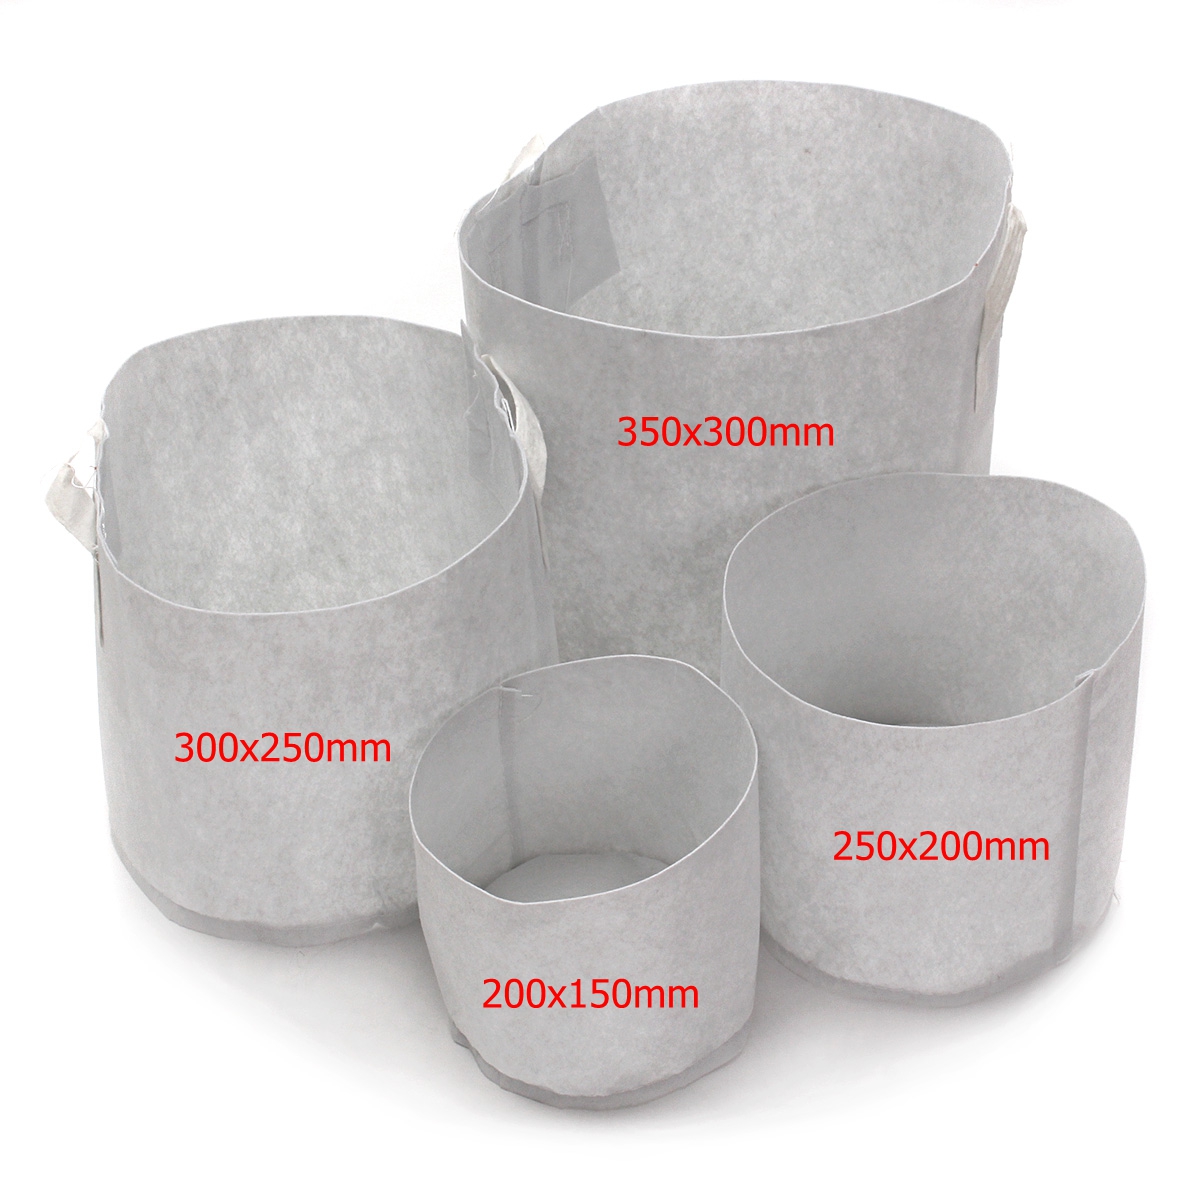 10Pcs-Eco-Friendly-Round-Fabric-Pot-Planting-Pouch-Root-Grow-Aeration-Container-Seedling-Bag-Box-1172091-2